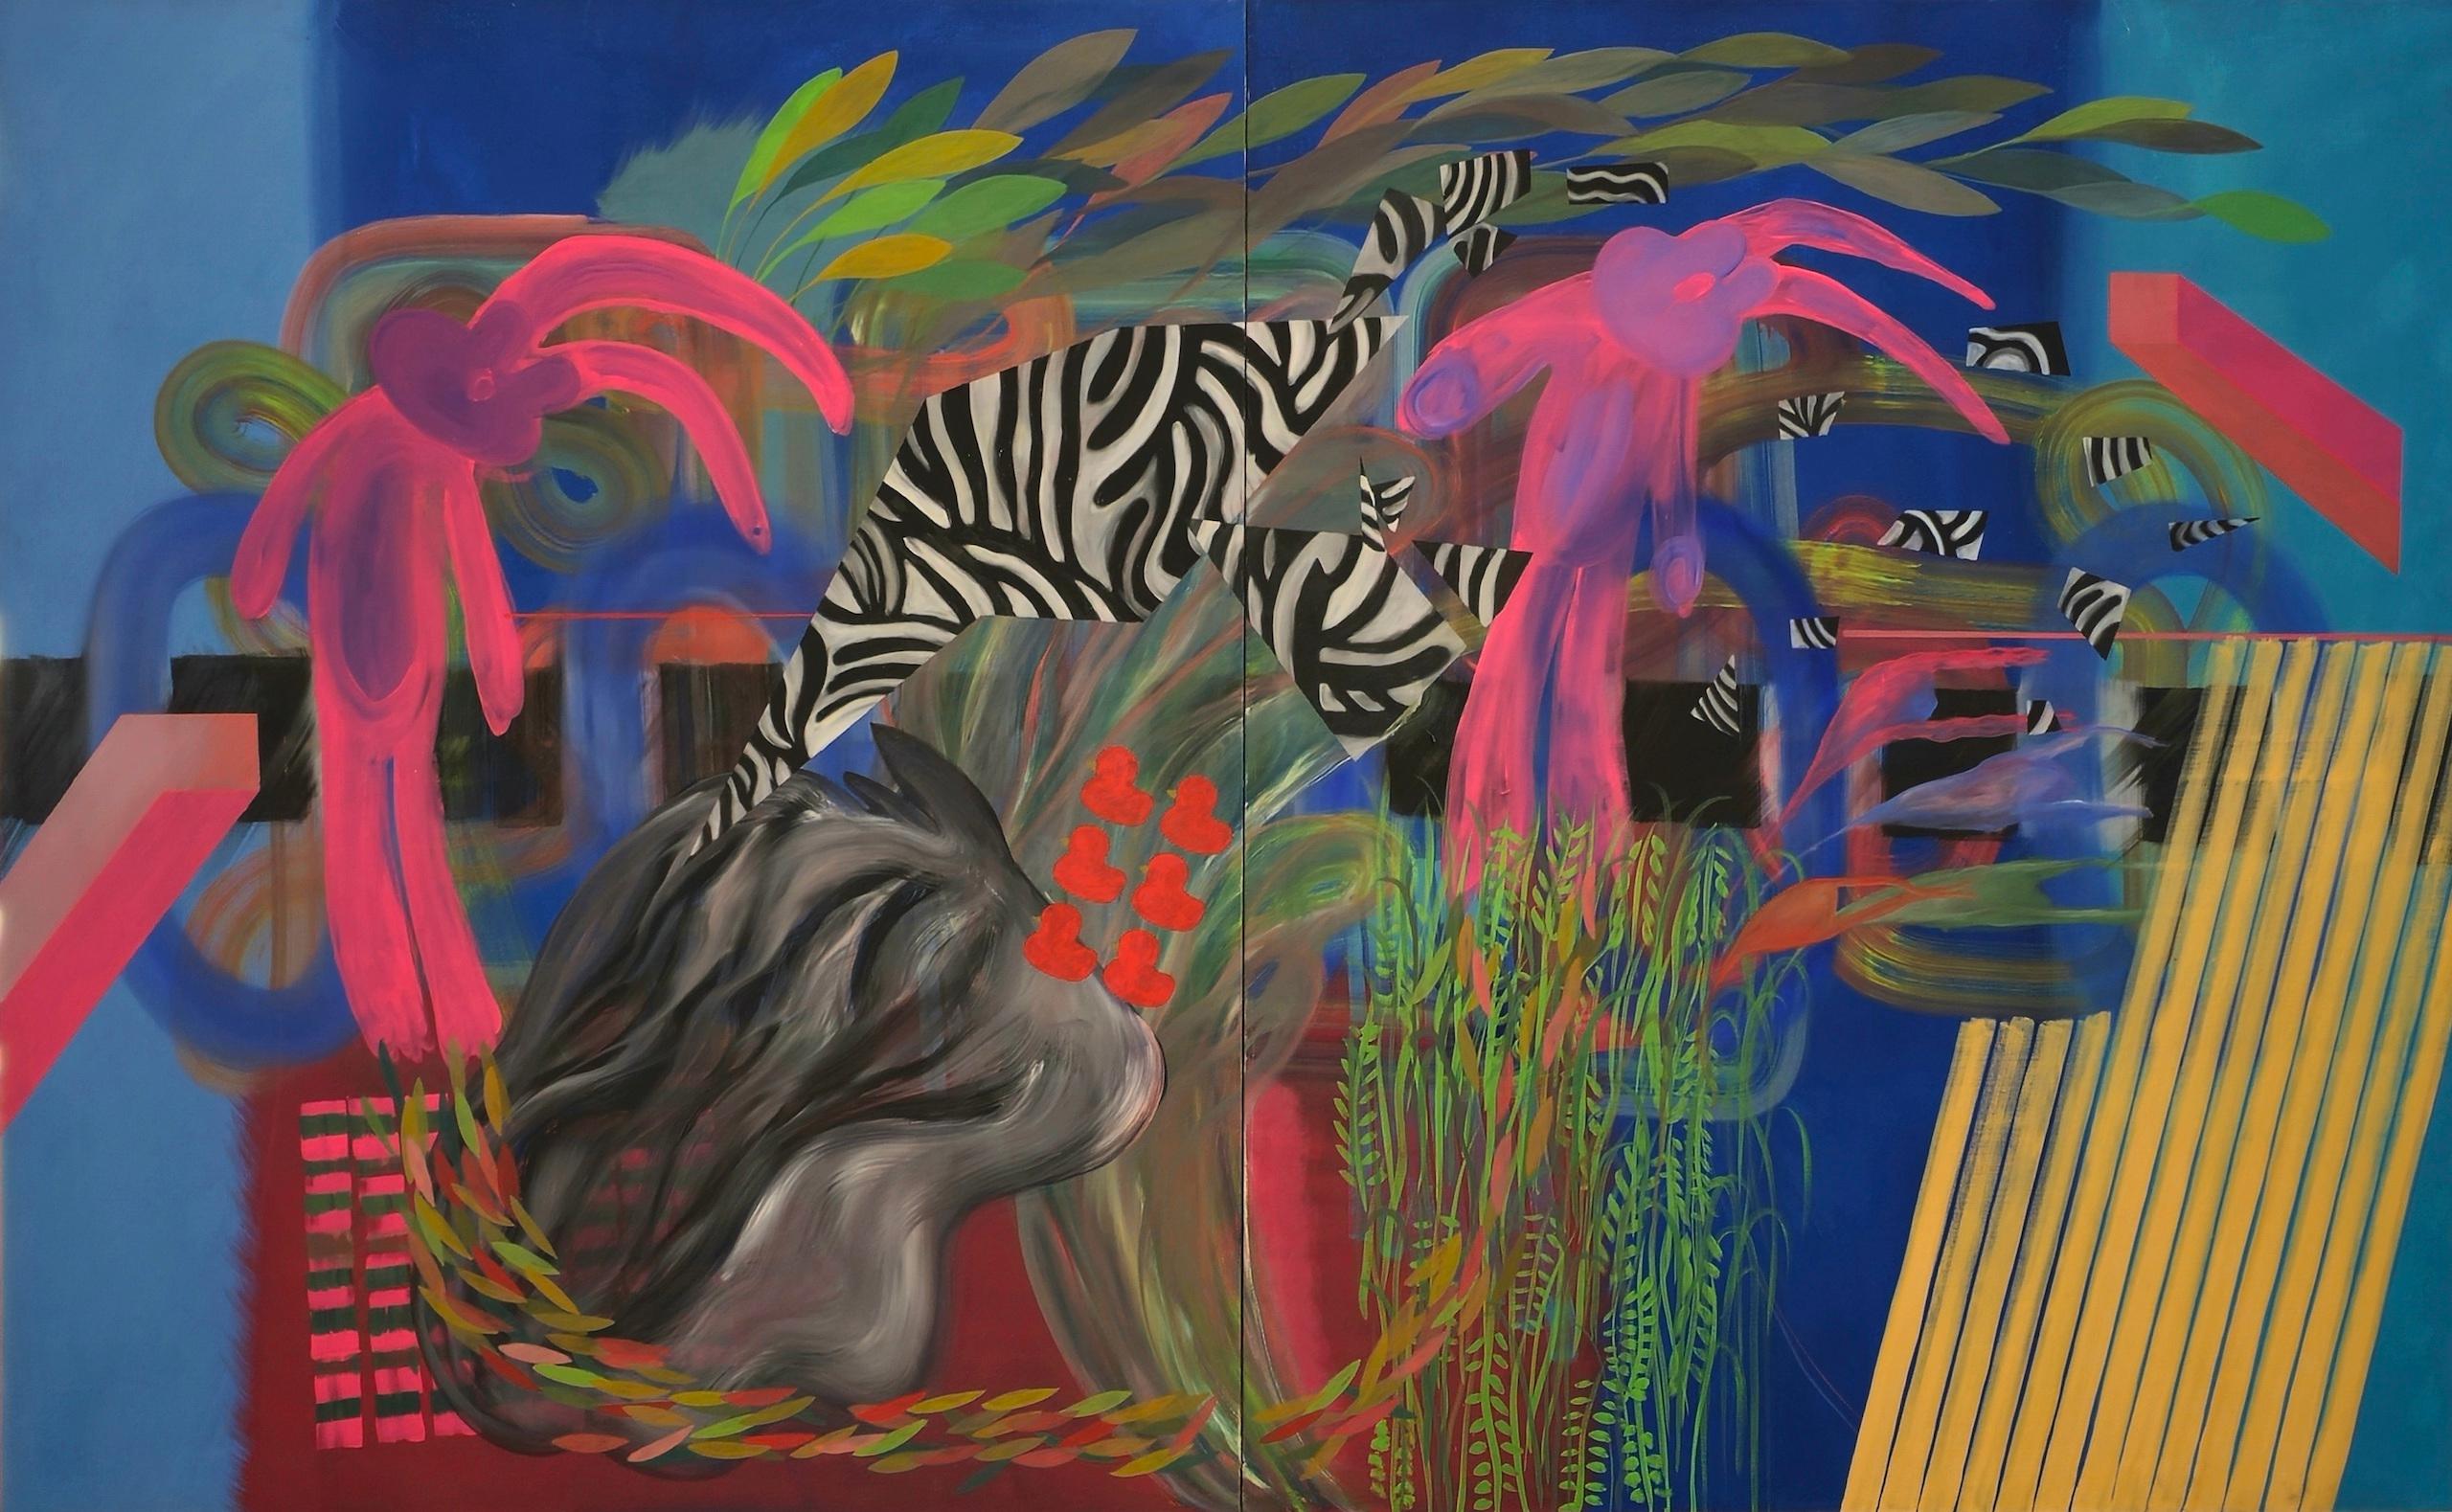 GROWING UP (#12) is a unique oil on canvas diptych painting by contemporary artist Zoran Šimunović, dimensions are 180 × 290 cm (70.9 × 114.2 in). The artwork is sold unframed.
The artwork is signed and comes with a certificate of authenticity.